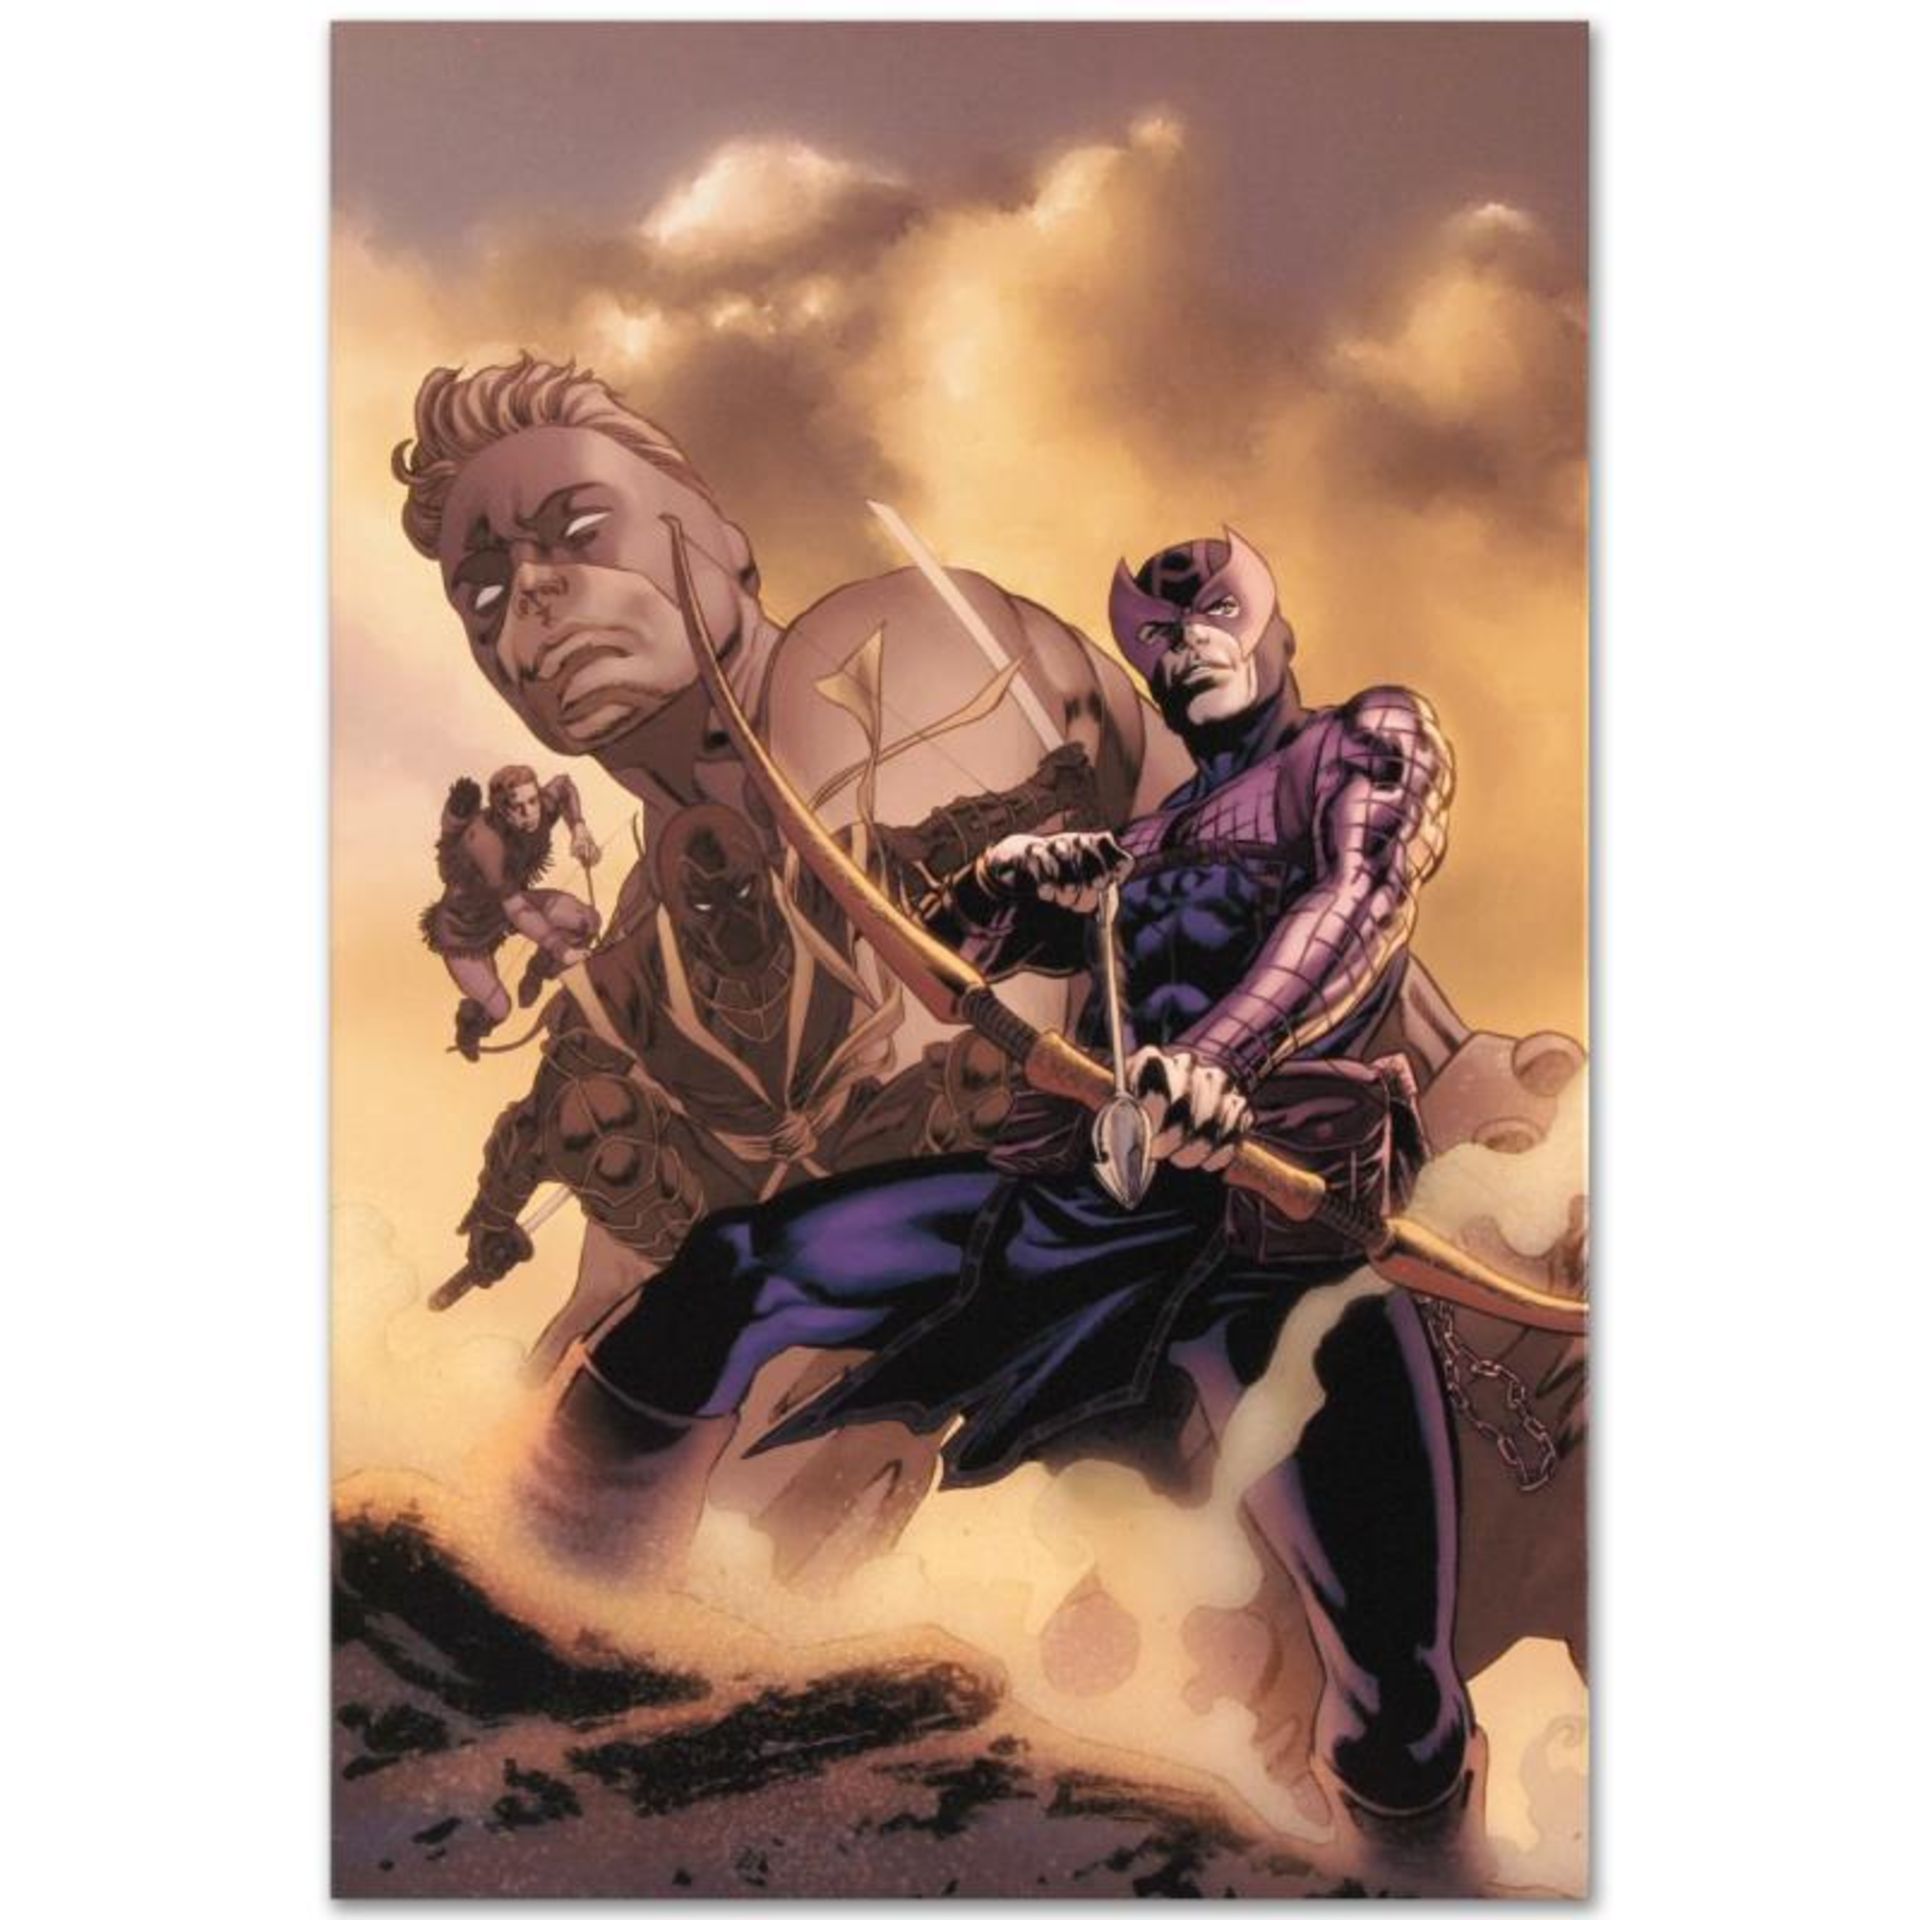 Marvel Comics "Hawkeye: Blindside #4" Numbered Limited Edition Giclee on Canvas